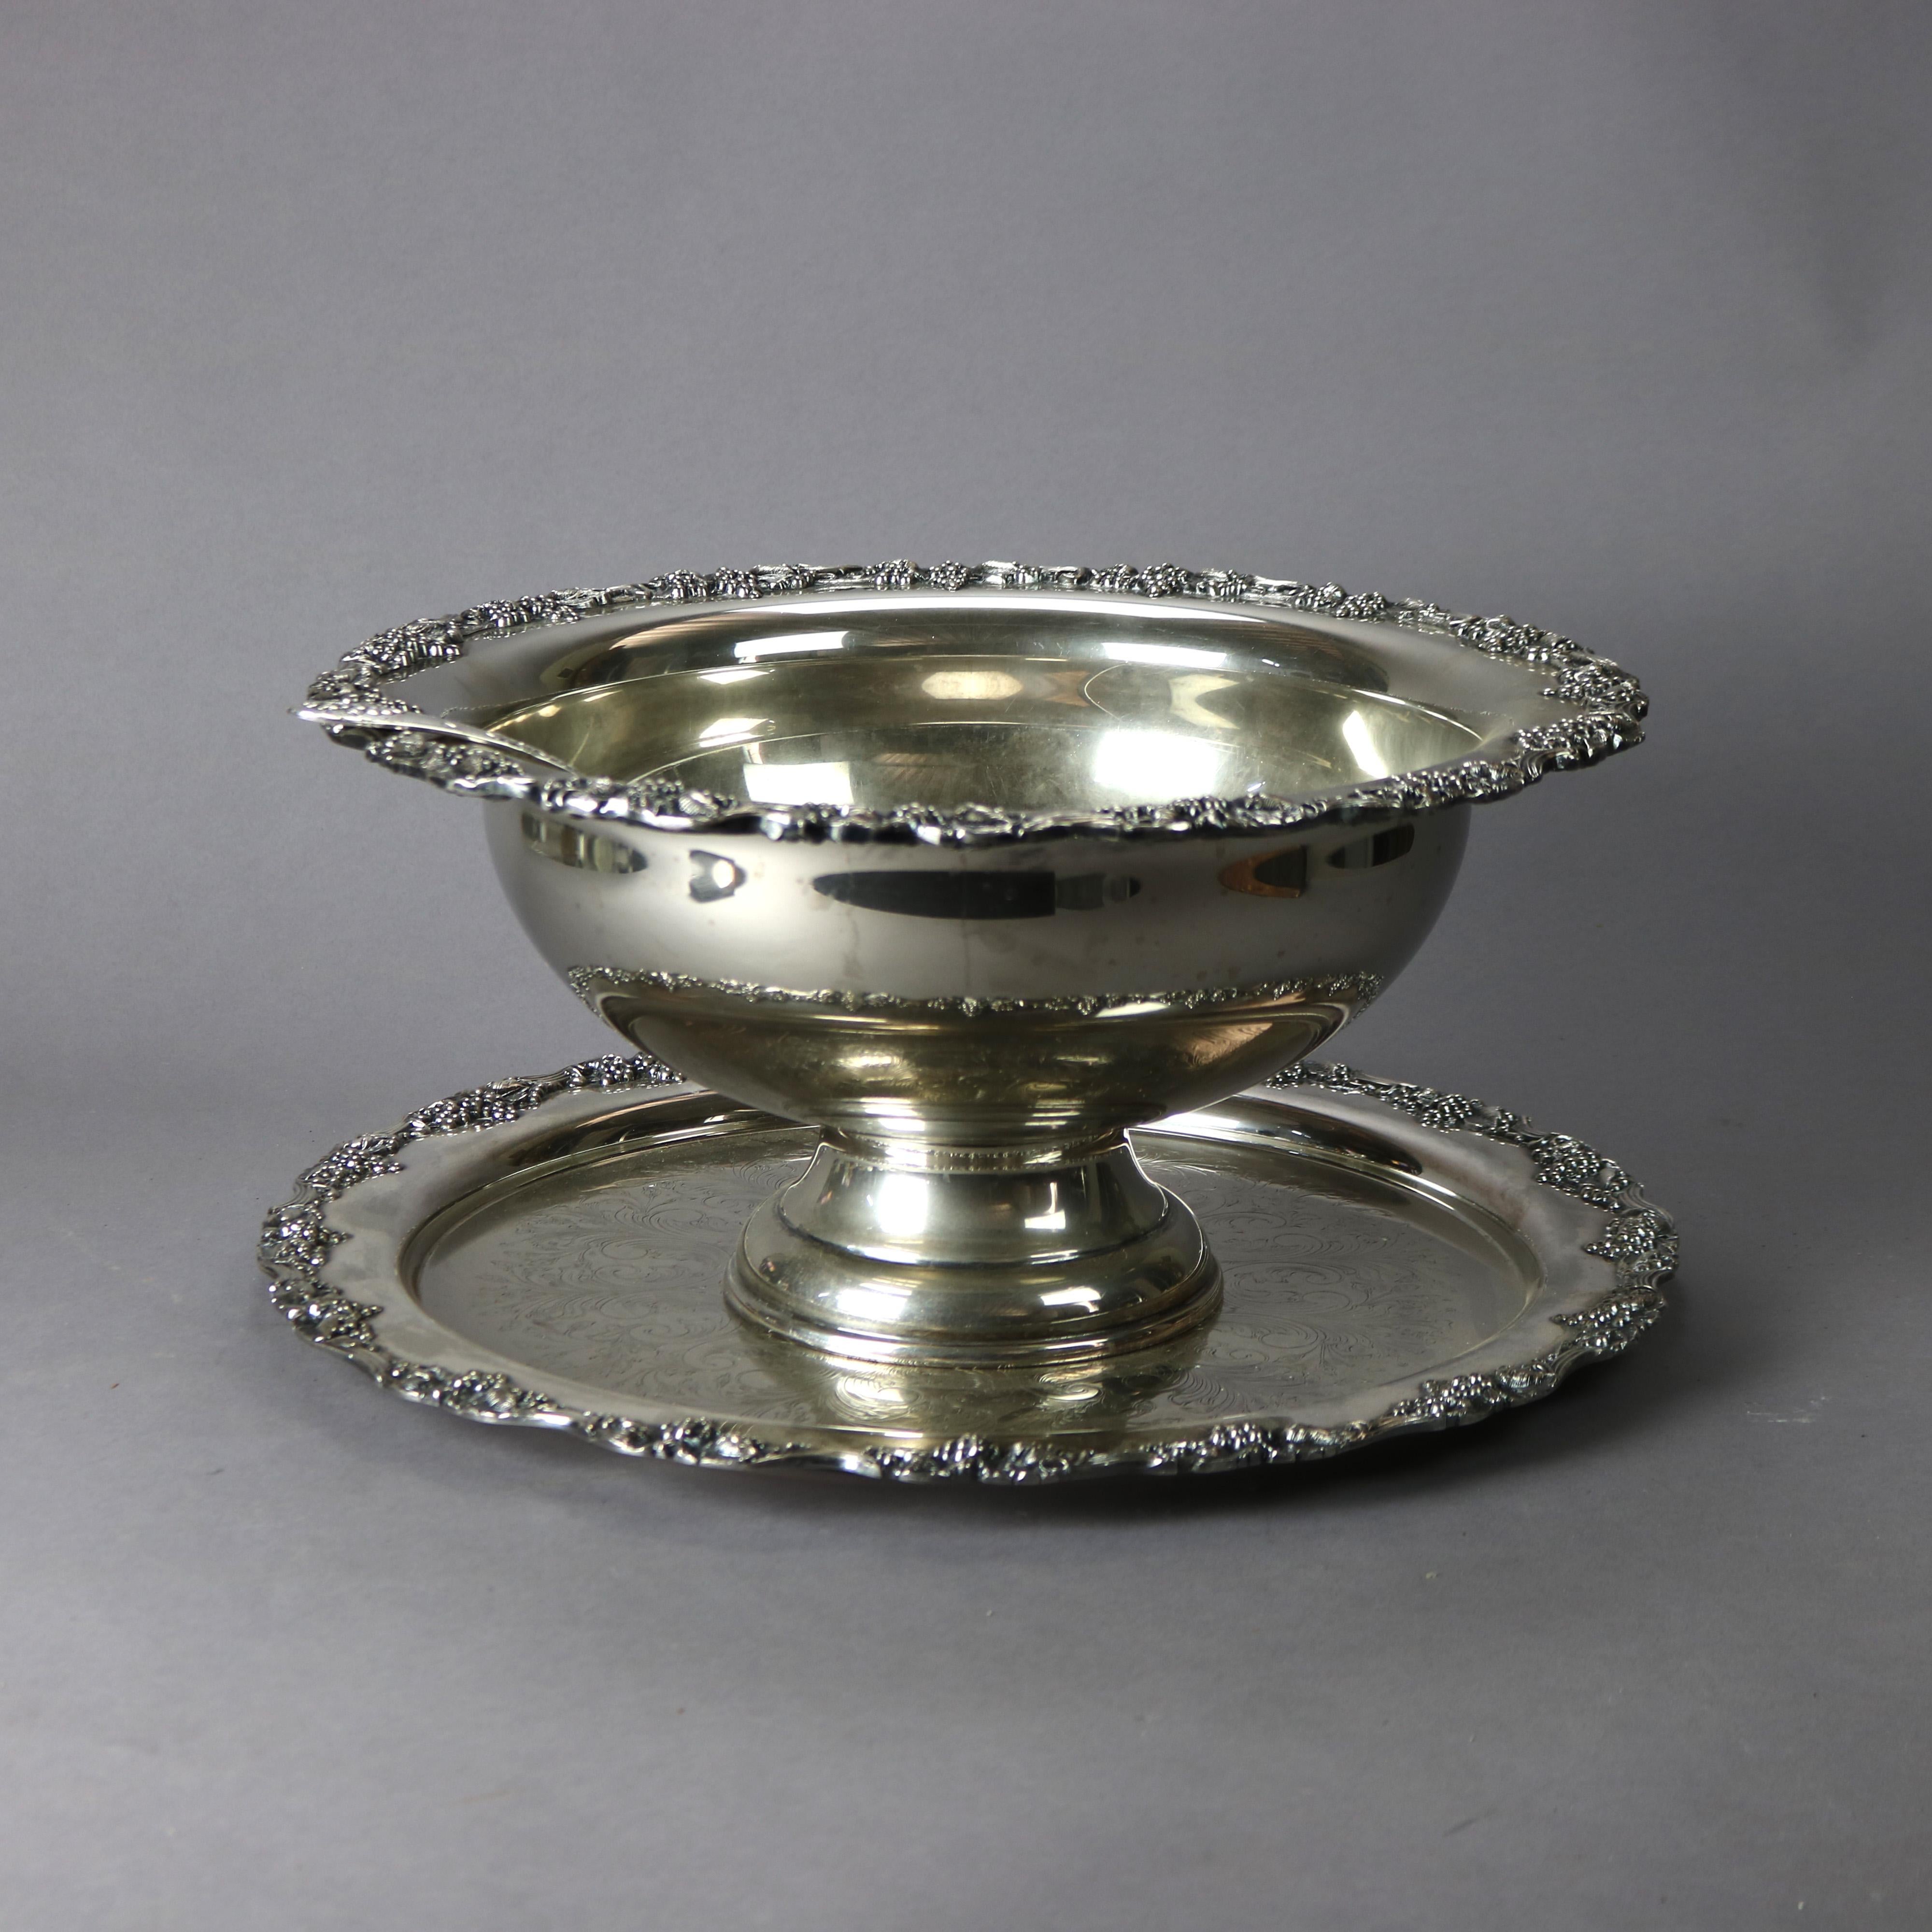 A silver plate punch bowl set by Sheriden Taunton Silversmiths offers silver plate construction with embossed and engraved foliate decoration; set includes tray, ladle and bowl; maker label as photographed; 20th century

Measures - Tray